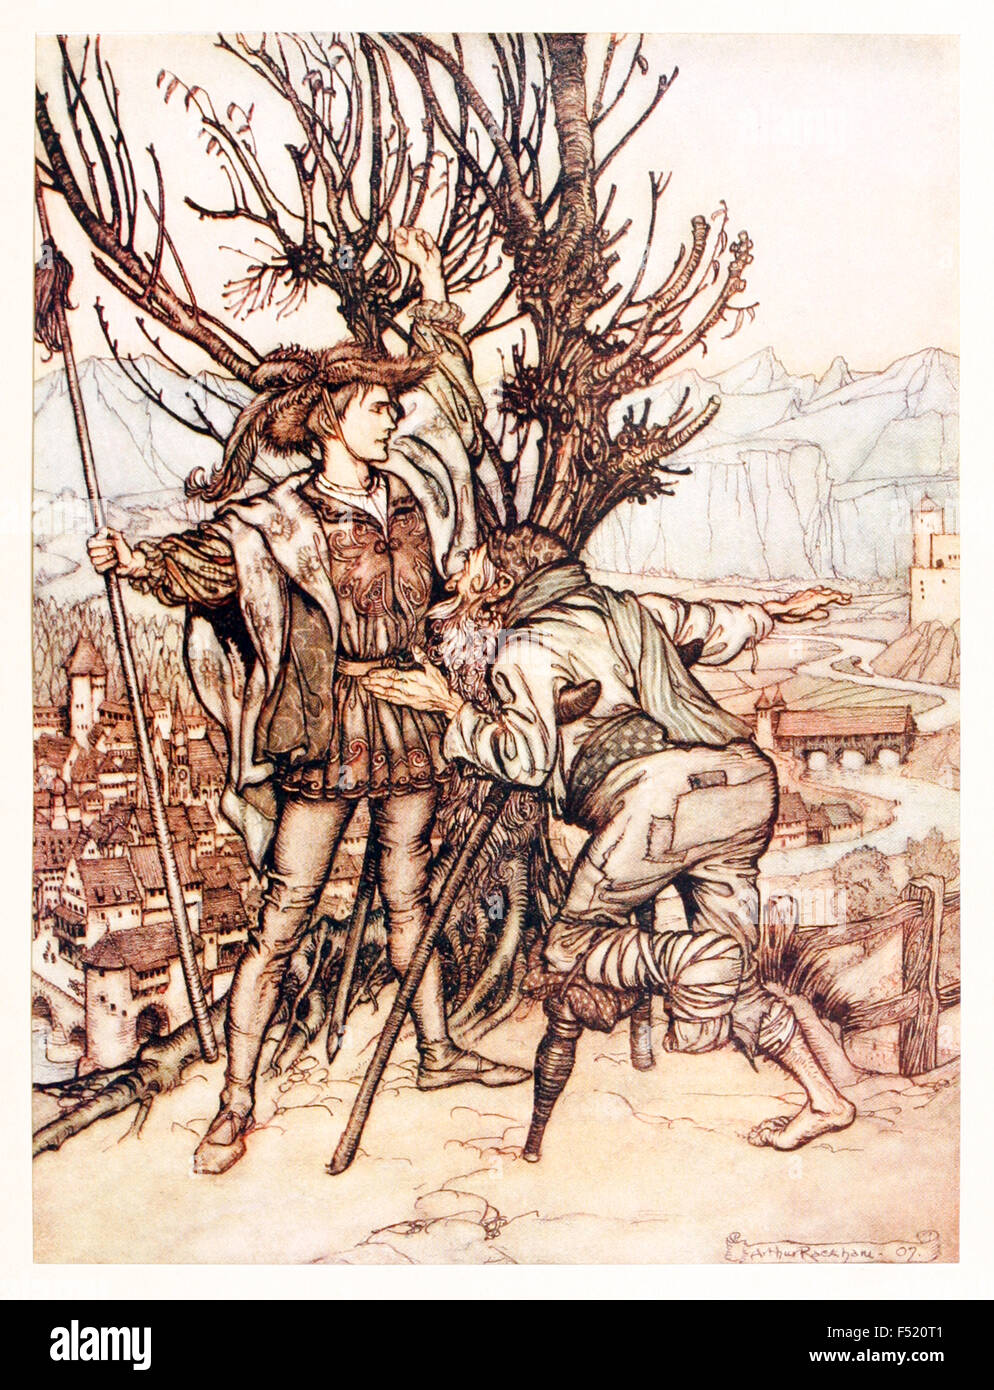 'The young Prince said, 'I am not afraid; I am determined to go and look upon the lovely Briar Rose.' from 'Briar Rose' in ‘The Fairy Tales of the Brother's Grimm', illustration by Arthur Rackham (1867-1939). See description for more information. Stock Photo